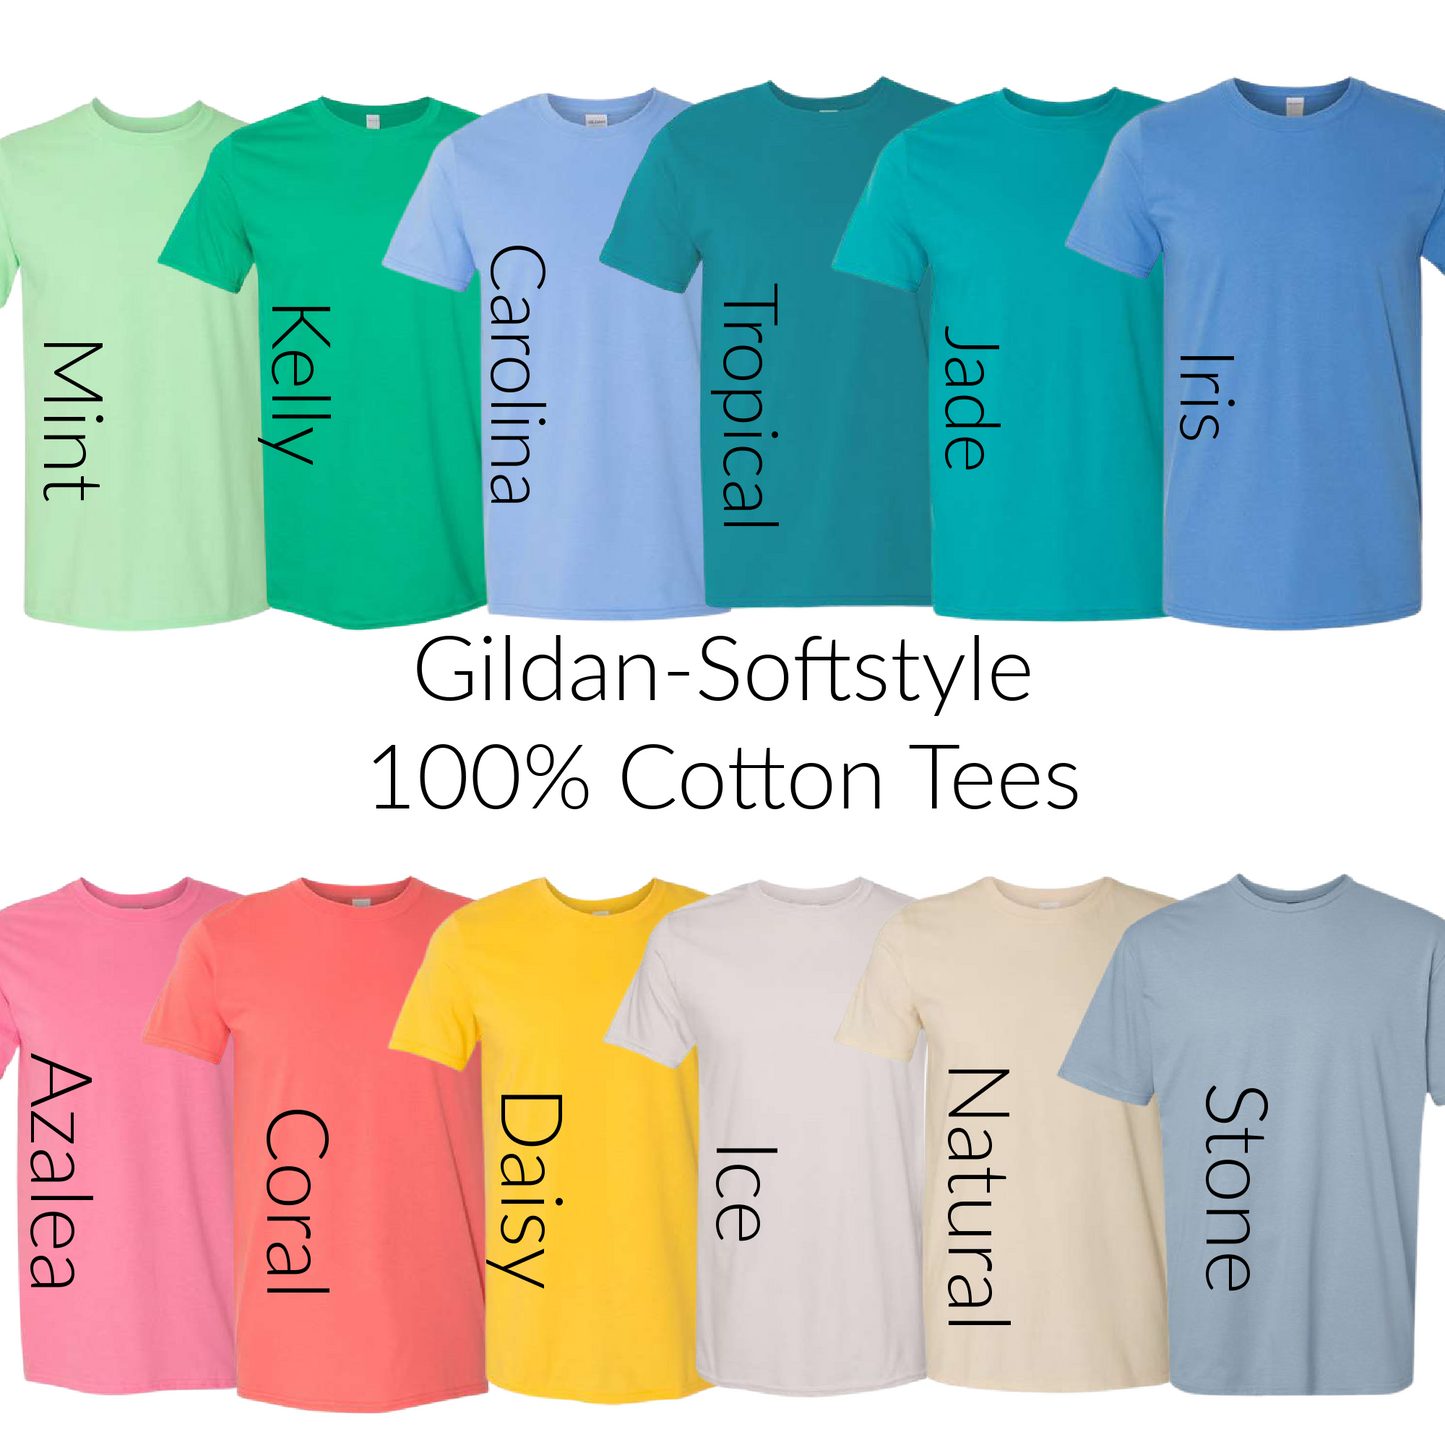 Game Changer Therapy Services - 100% Cotton - Gildan Softstyle Tee